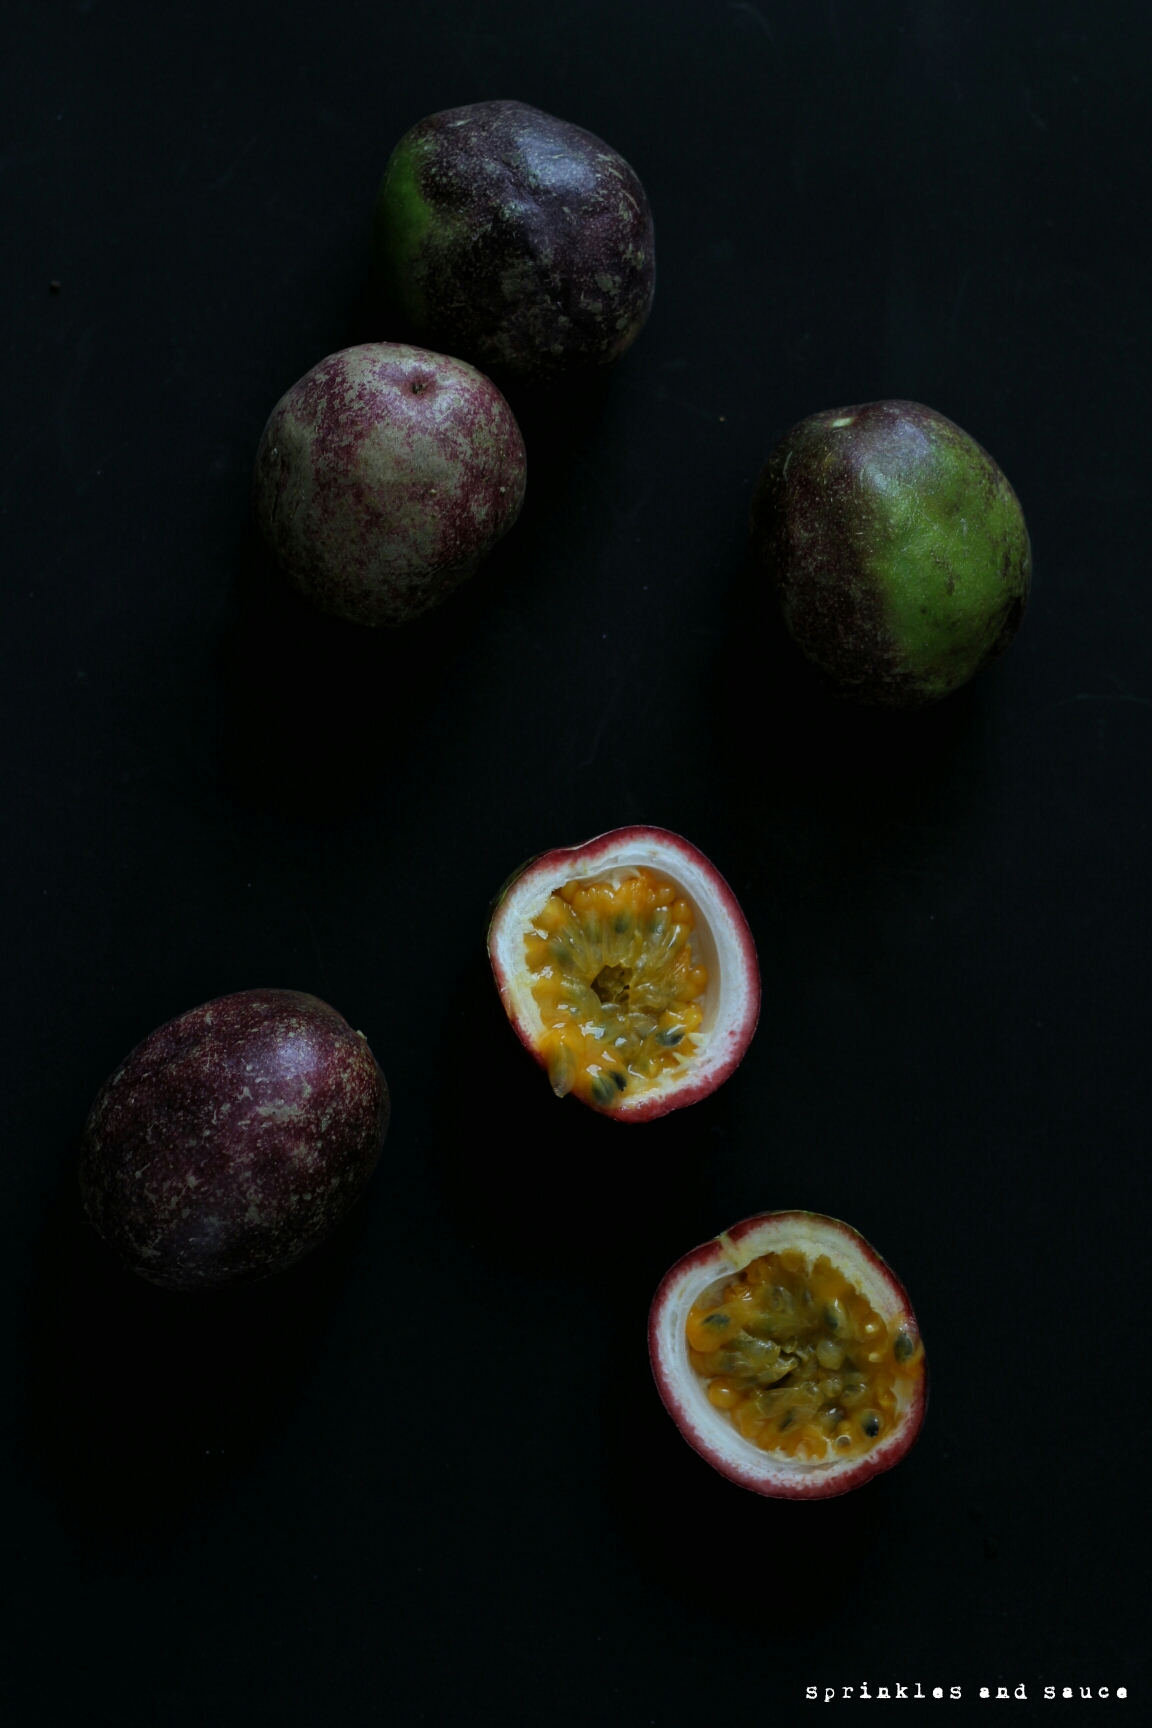 Passion fruit – facts, nutritional benefits and recipes